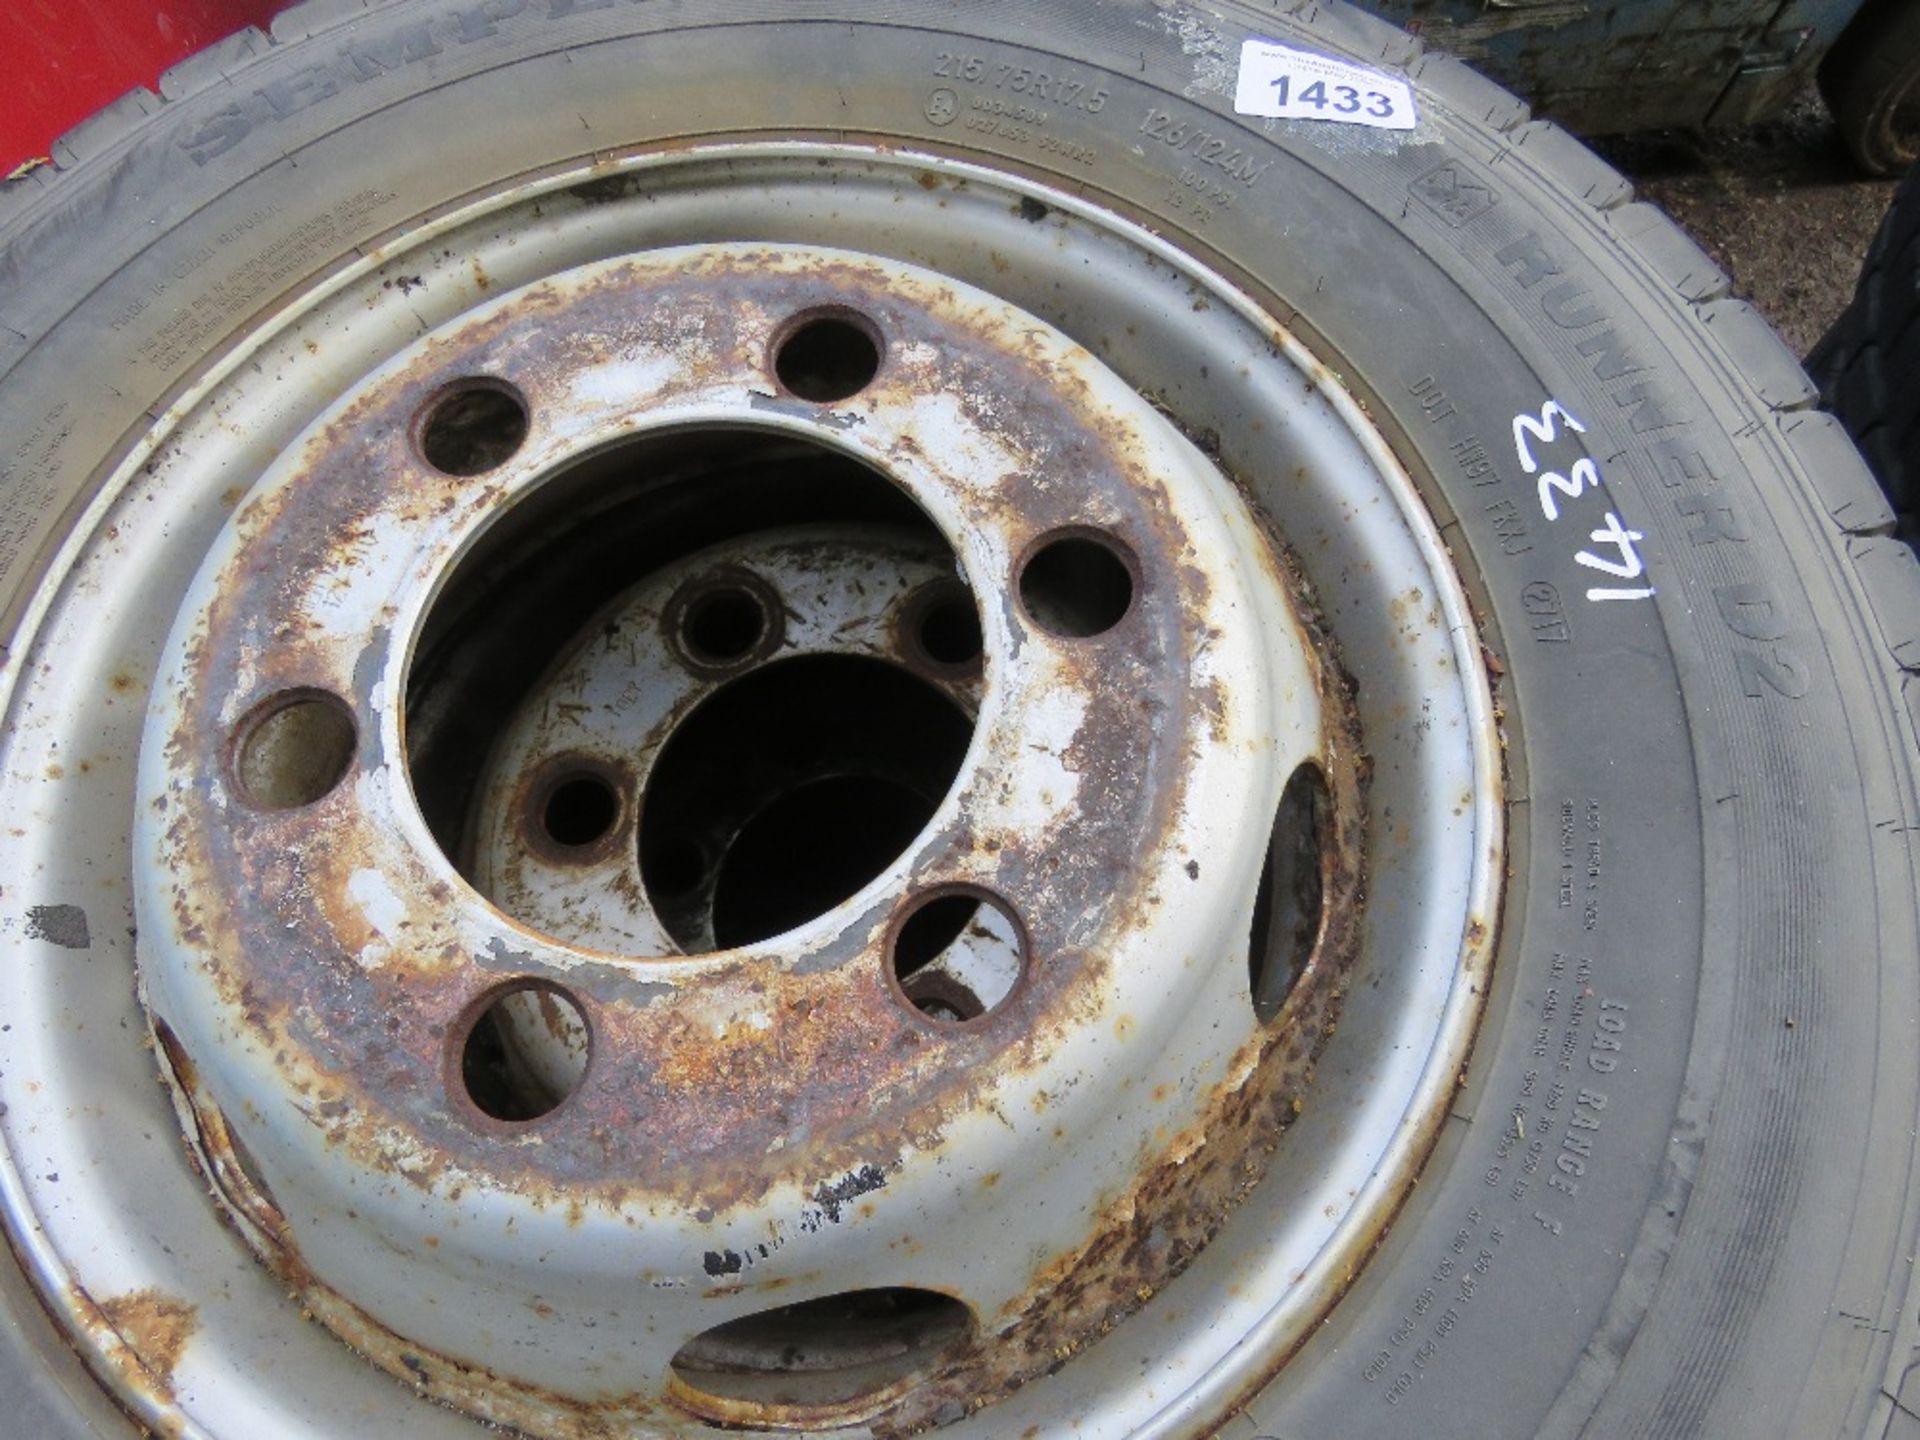 6NO 6 STUD LORRY WHEELS & TYRES 215/75-R17.5. - Image 5 of 6